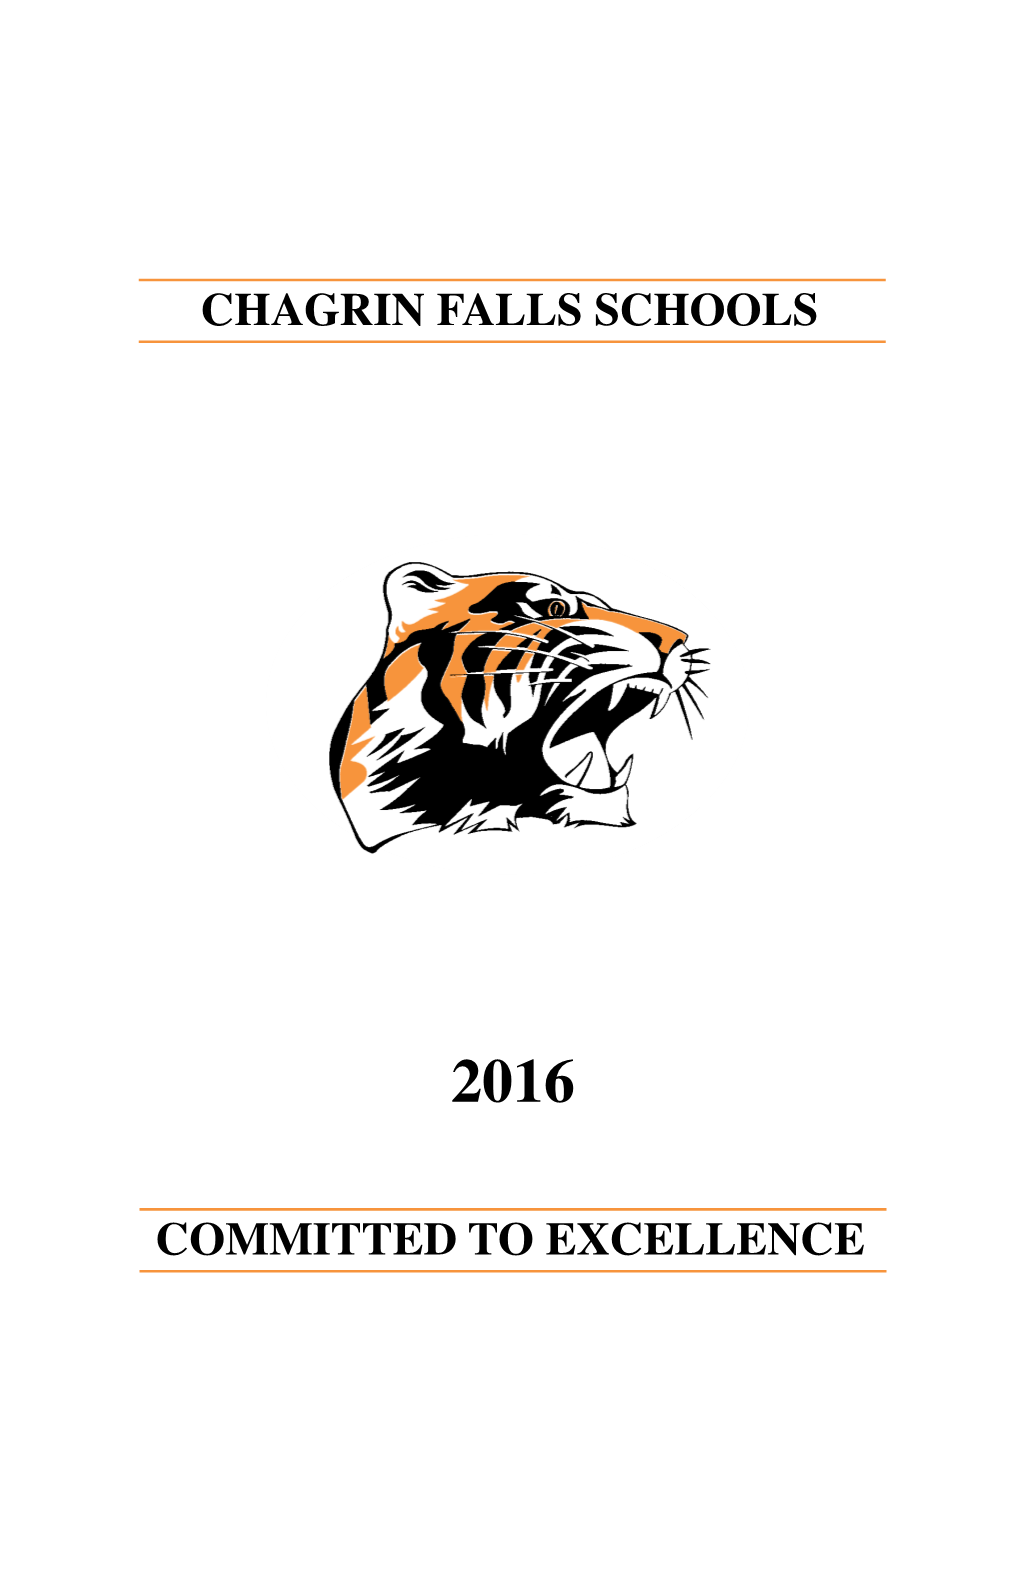 Chagrin Falls Schools Committed to Excellence